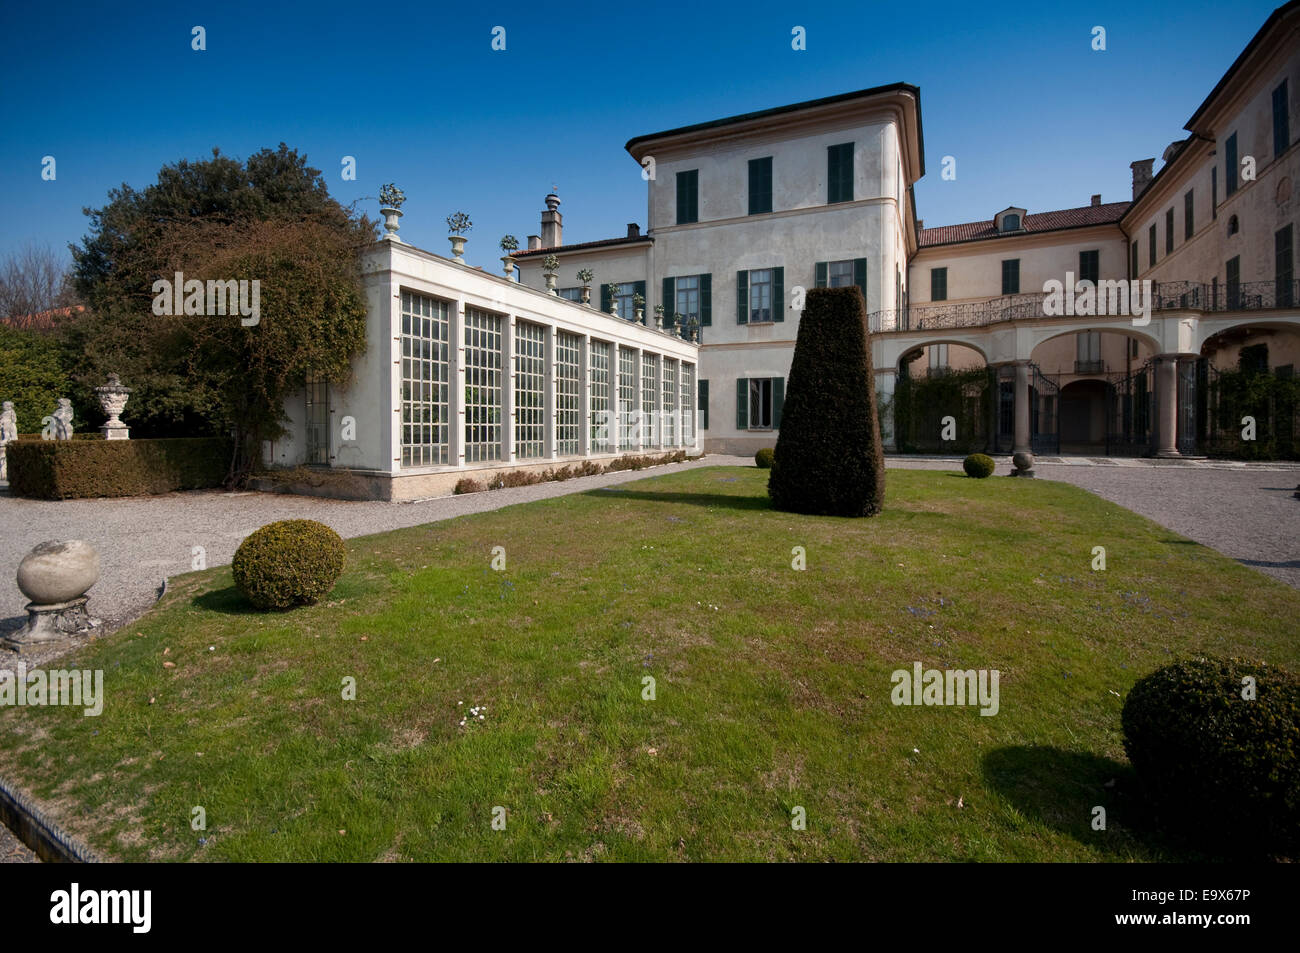 Villa Panza Varese High Resolution Stock Photography and Images - Alamy